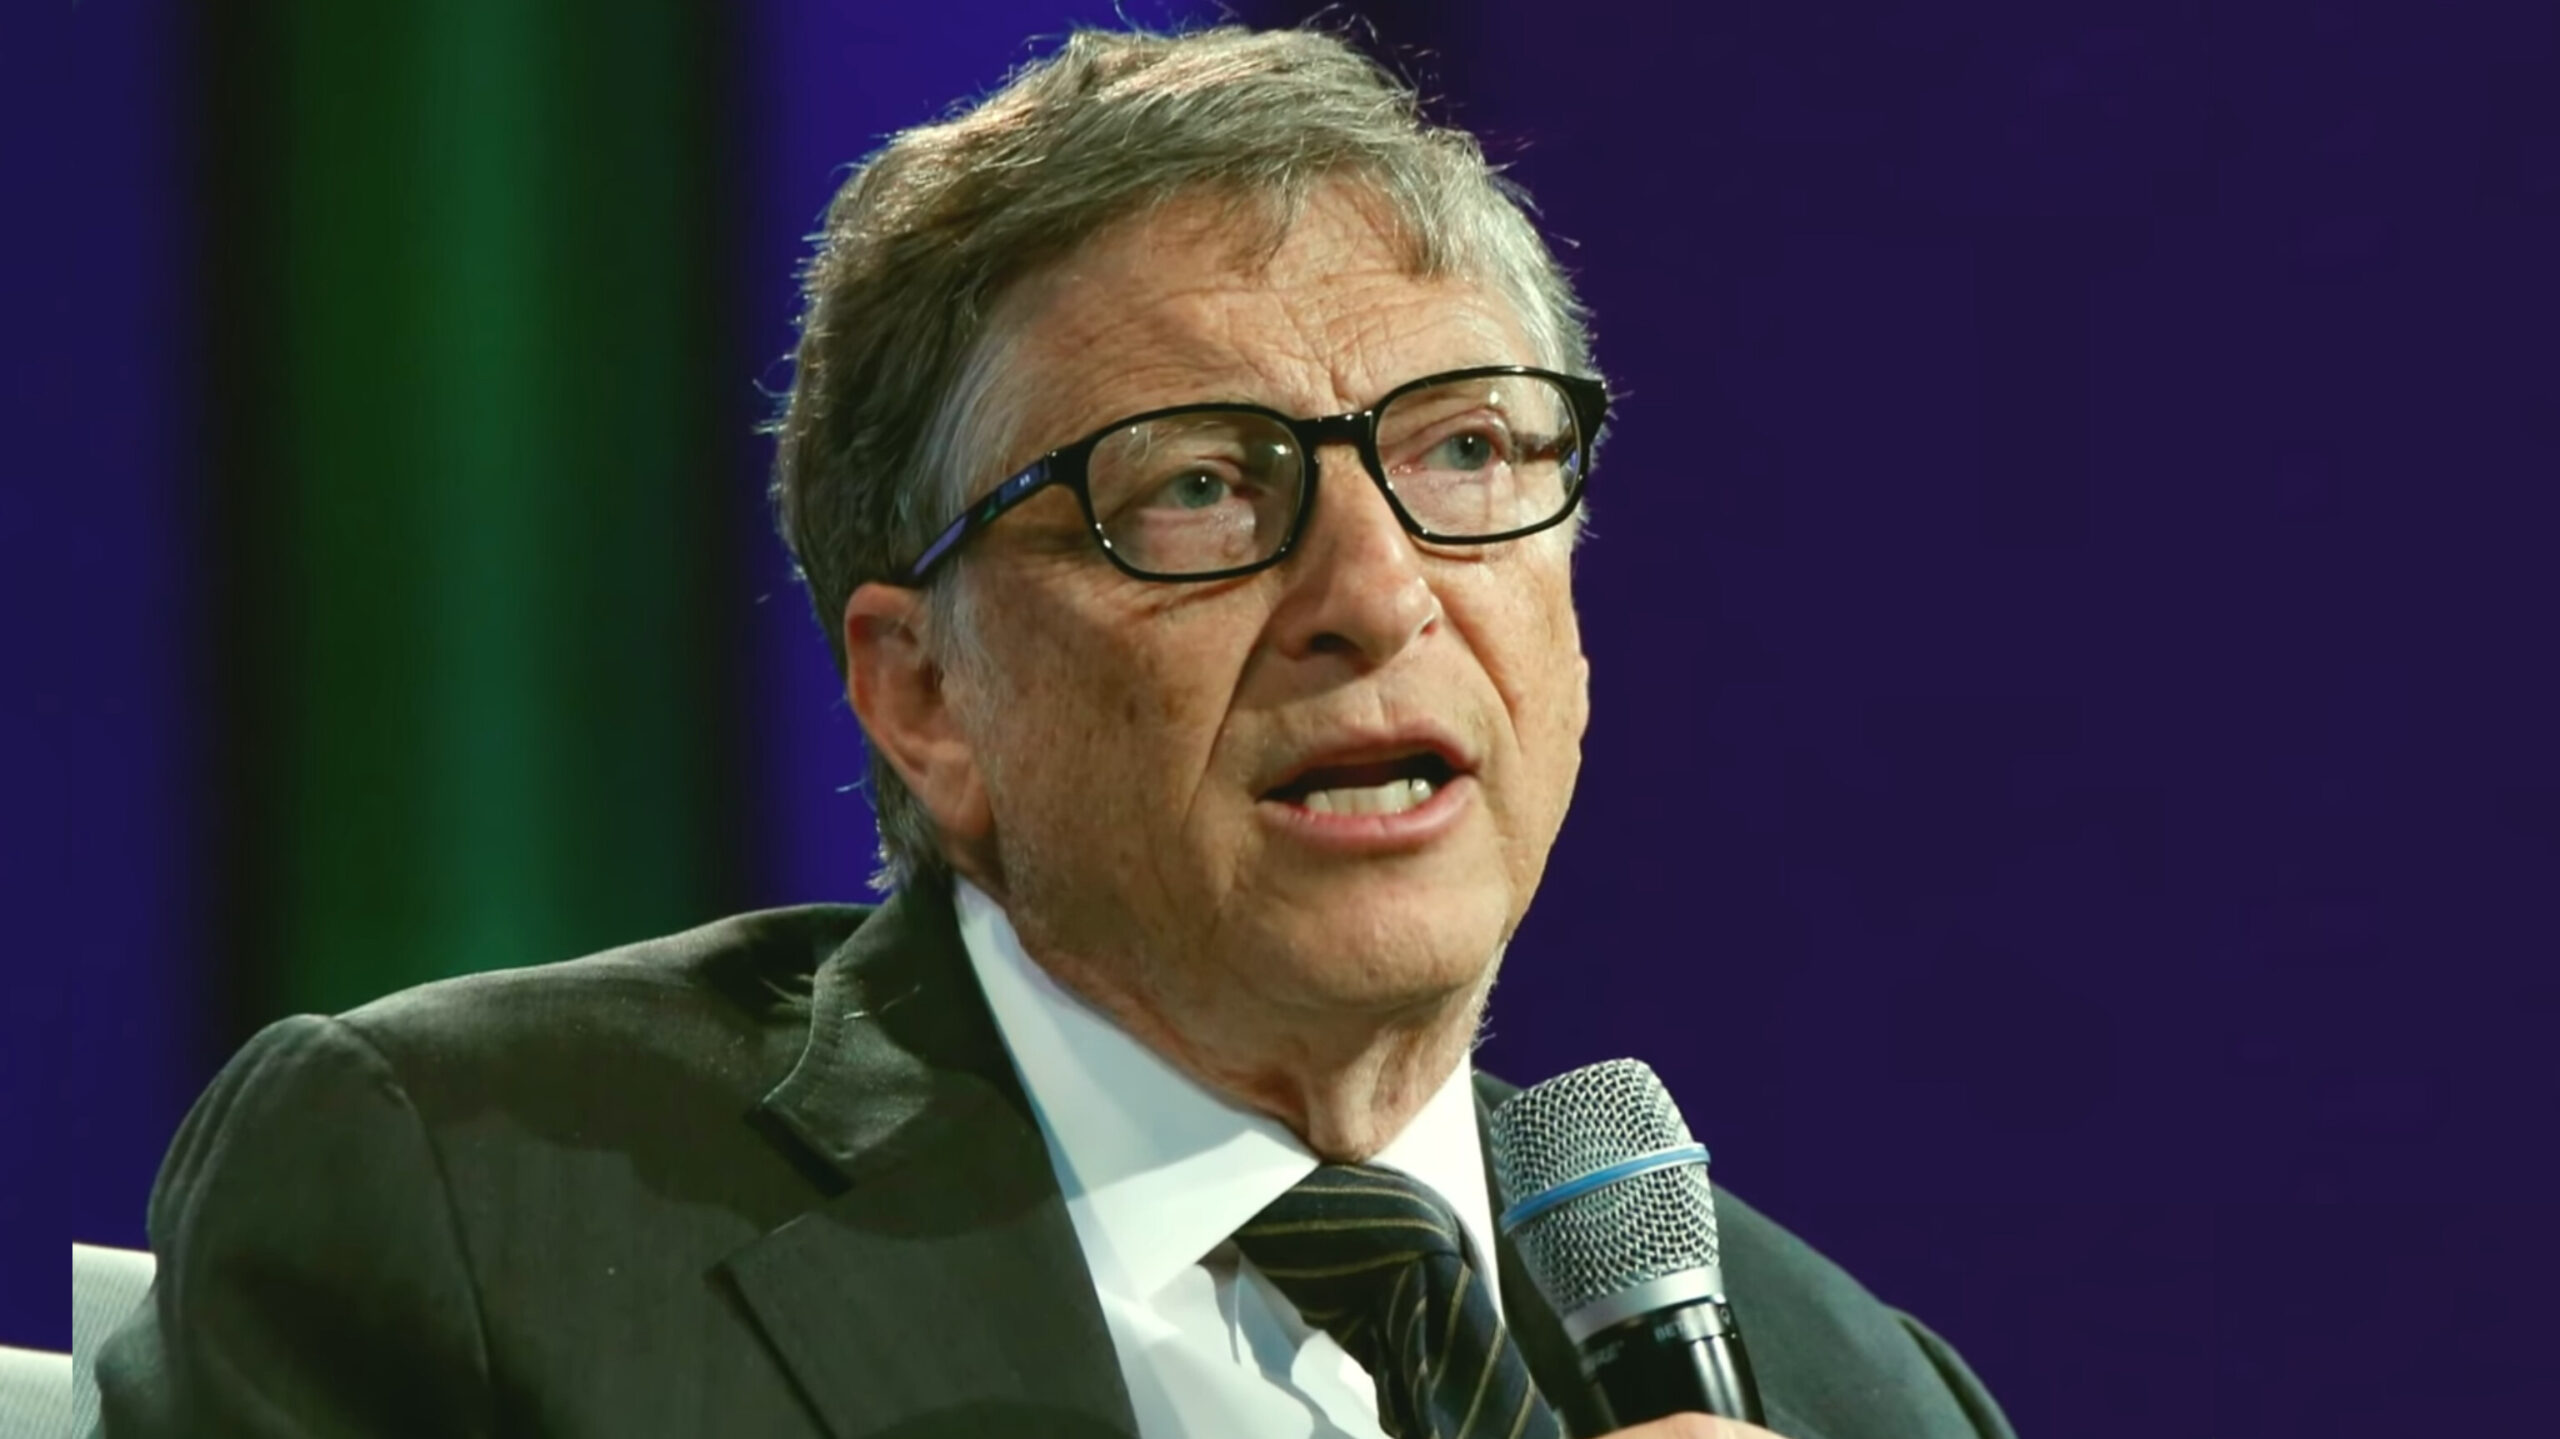 AI technology will help advance but good will of people is essential, Bill Gates